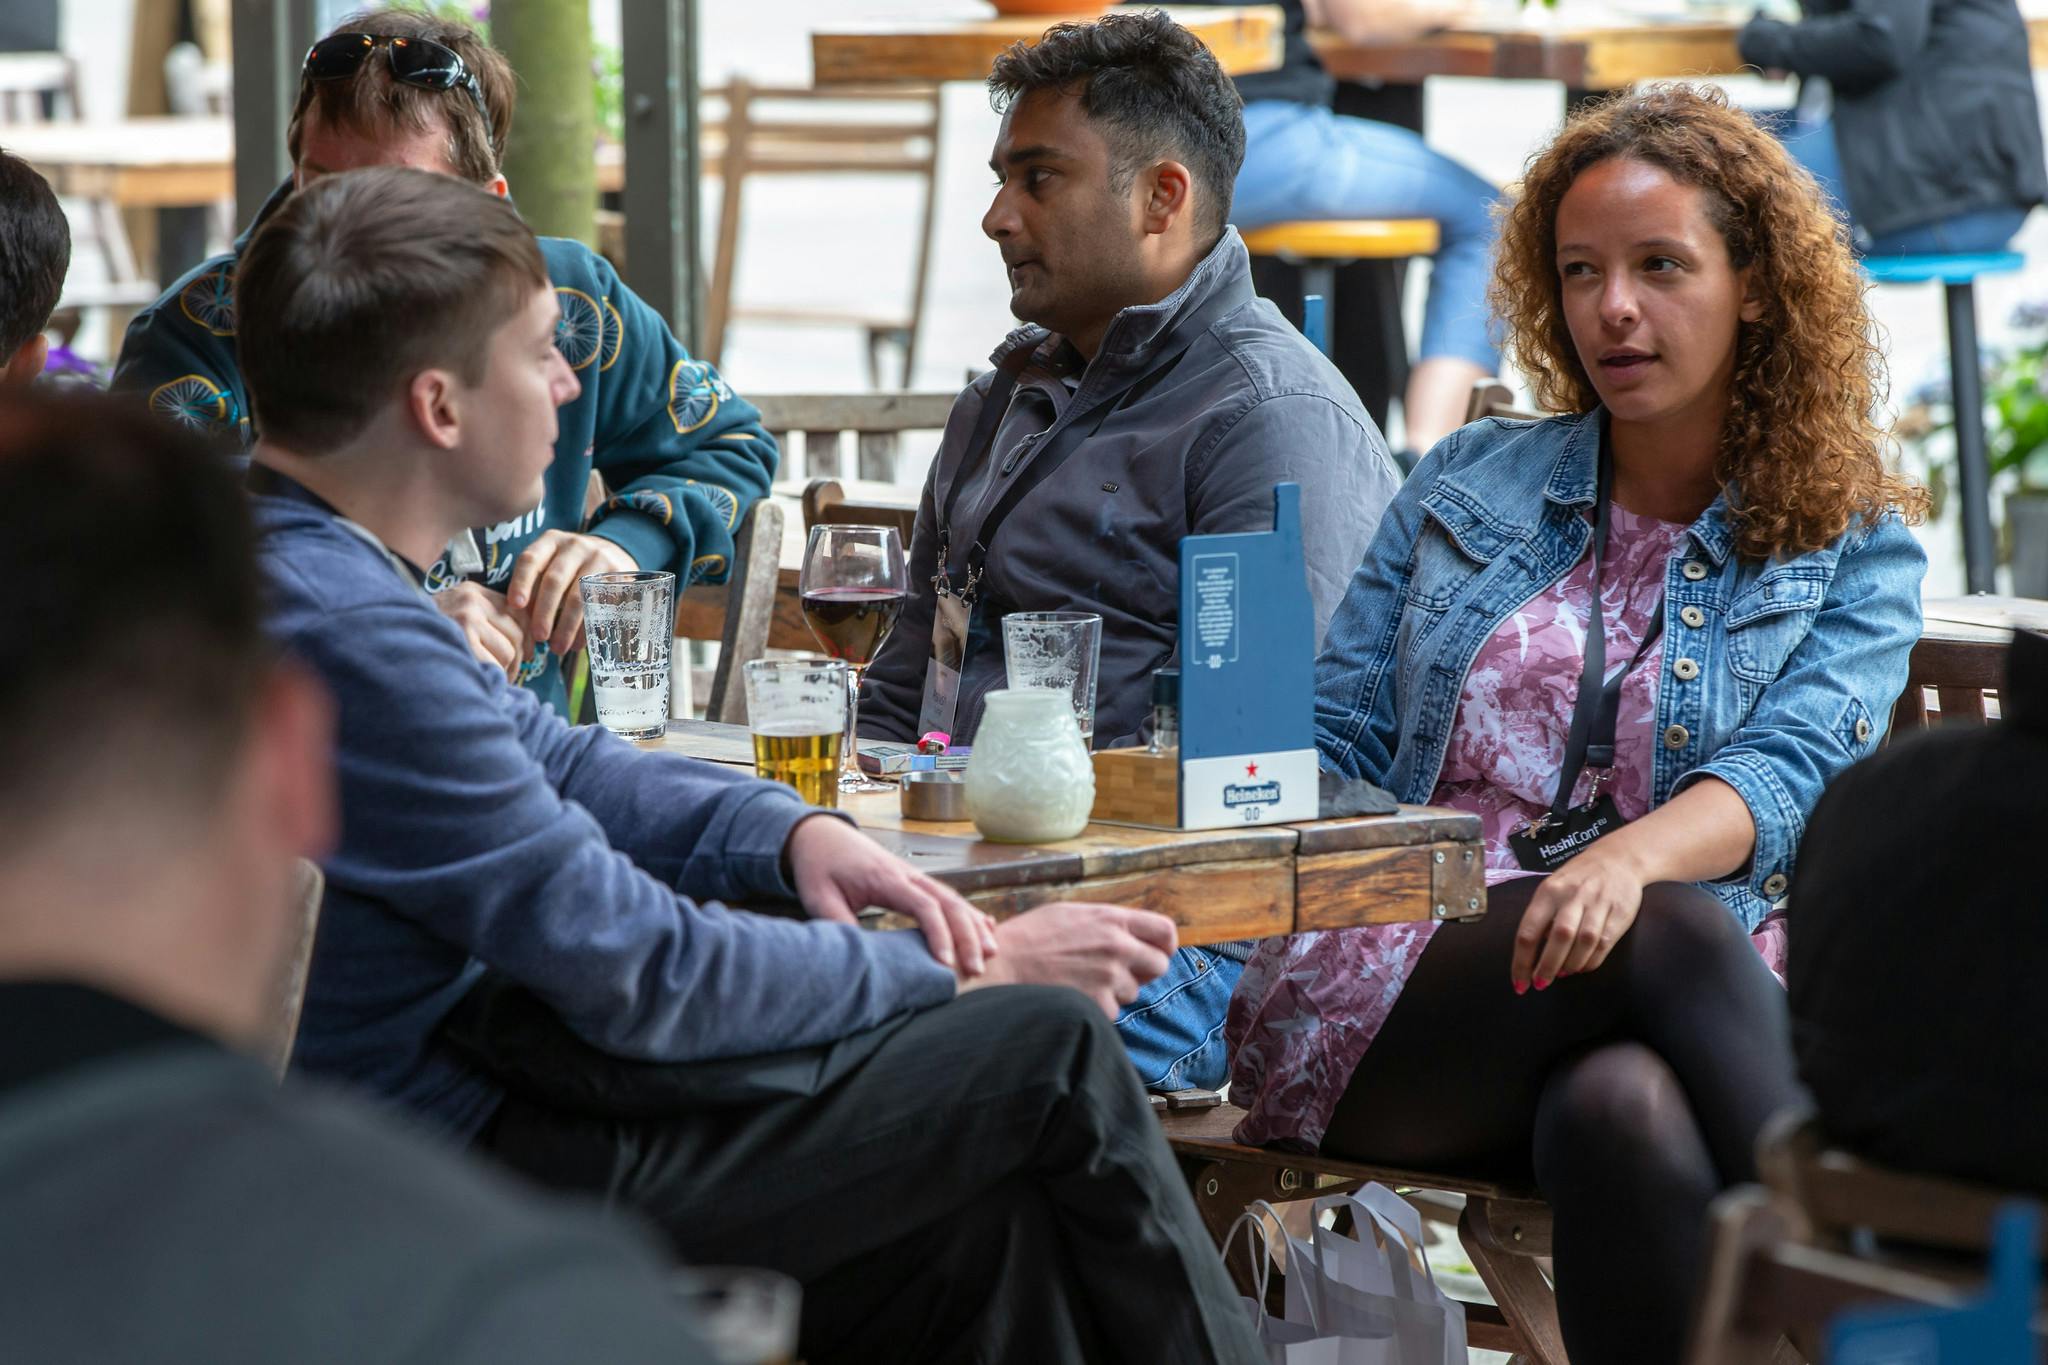 Photograph from HashiConf Eu 2019. People are seated around a table. A woman with shoulder length curly brown hair wearing a denim jacket and pink shirt is seated across from a man with short brown hair wearing a long sleeve dark blue shirt.